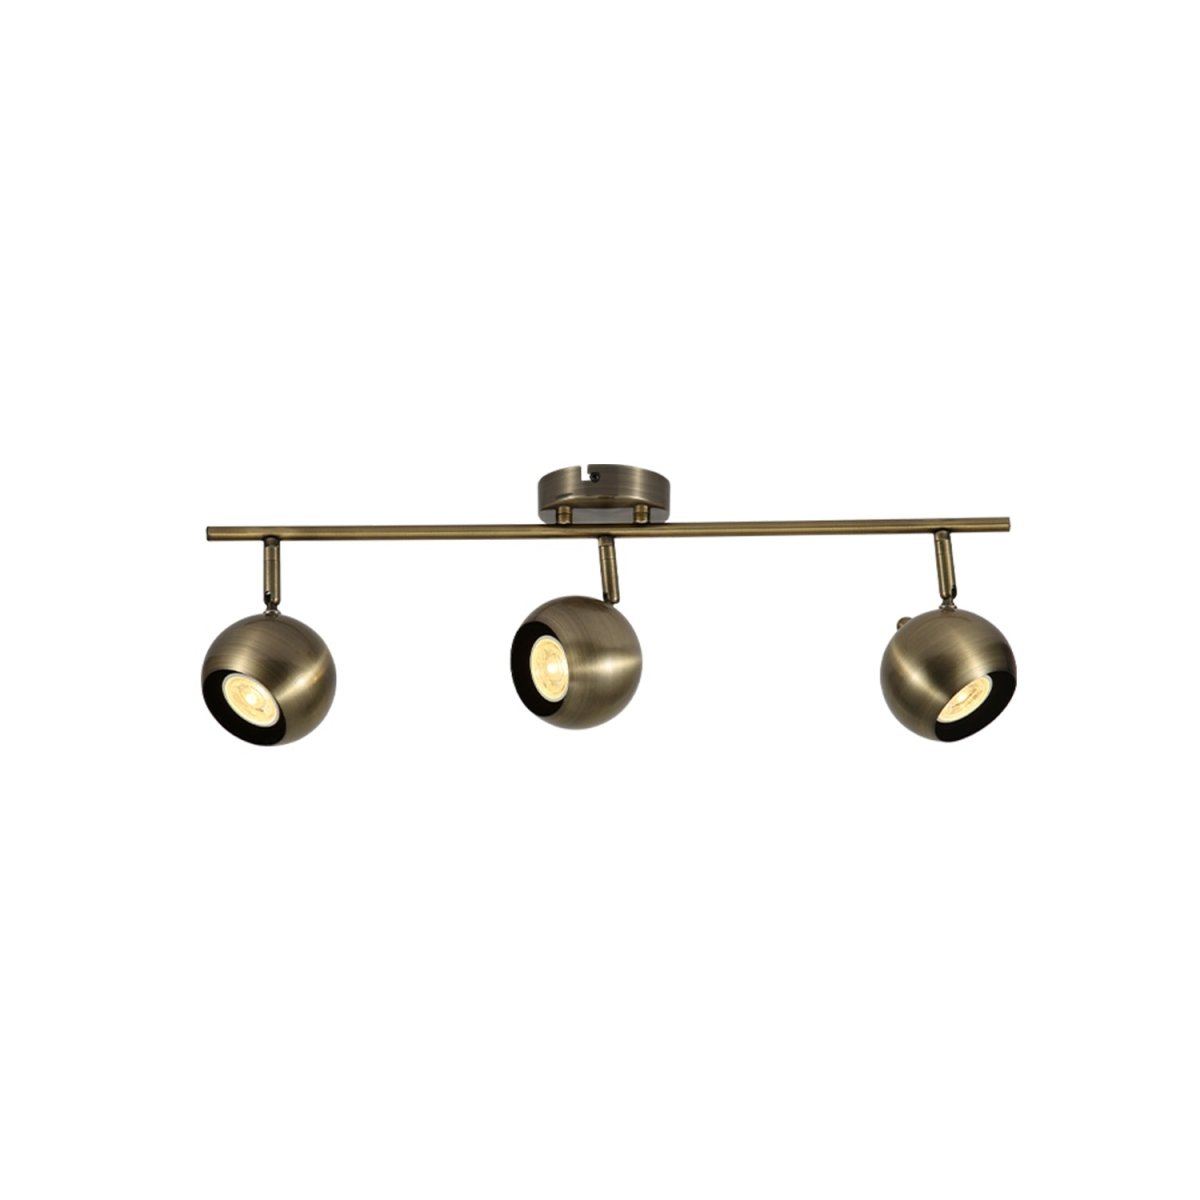 Main image of 3 Way Sphere Rod Spotlight with GU10 Fitting Antique Brass | TEKLED 172-03122